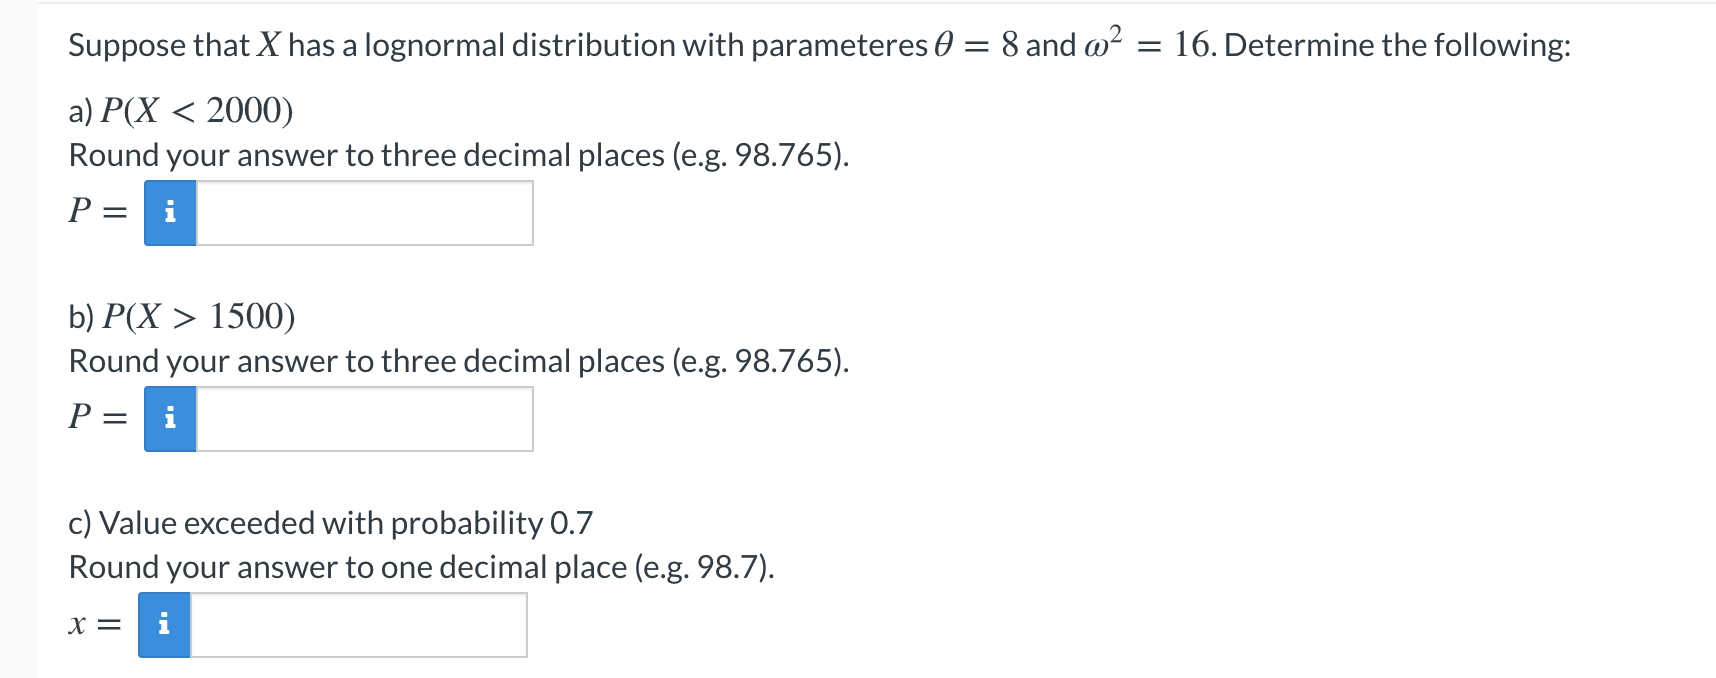 Suppose that X has a lognormal distribution with parameteres 0 = 8 and w?
= 16. Determine the following:
a) P(X < 2000)
Round your answer to three decimal places (e.g. 98.765).
P = i
b) P(X > 1500)
Round your answer to three decimal places (e.g. 98.765).
P = i
prohability O 7
